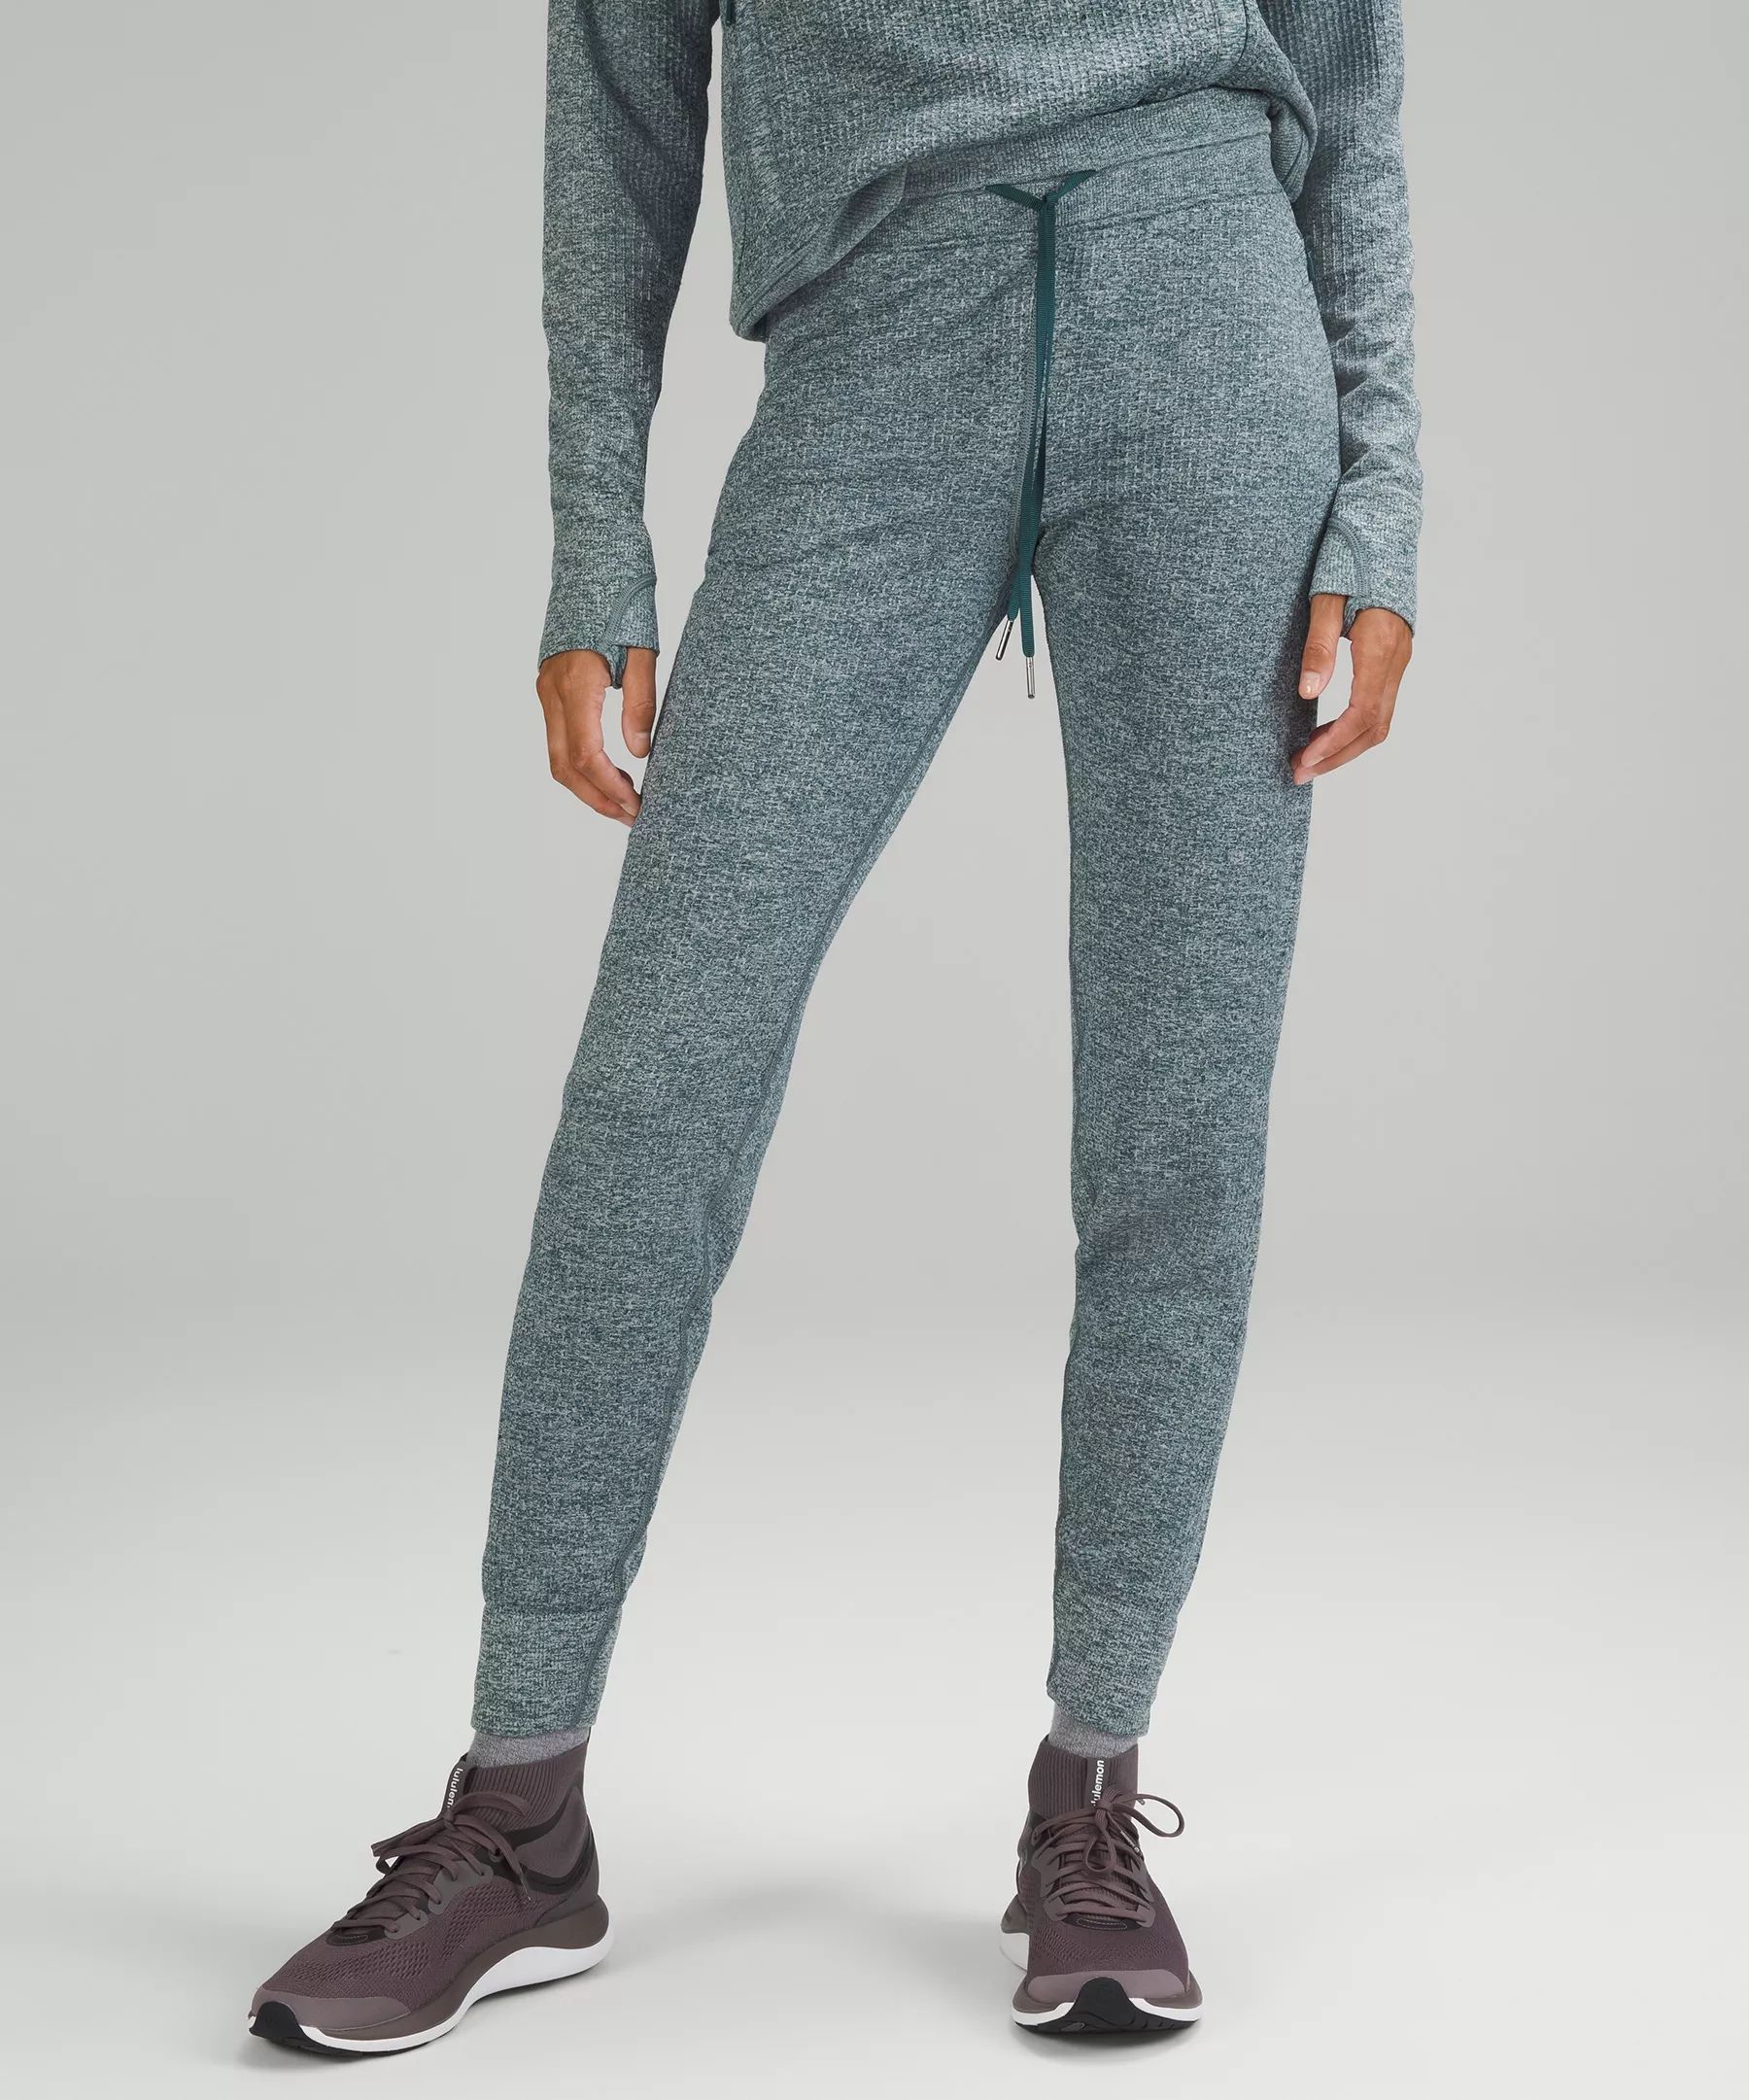 Engineered Warmth Relaxed Fit Jogger | Lululemon (US)